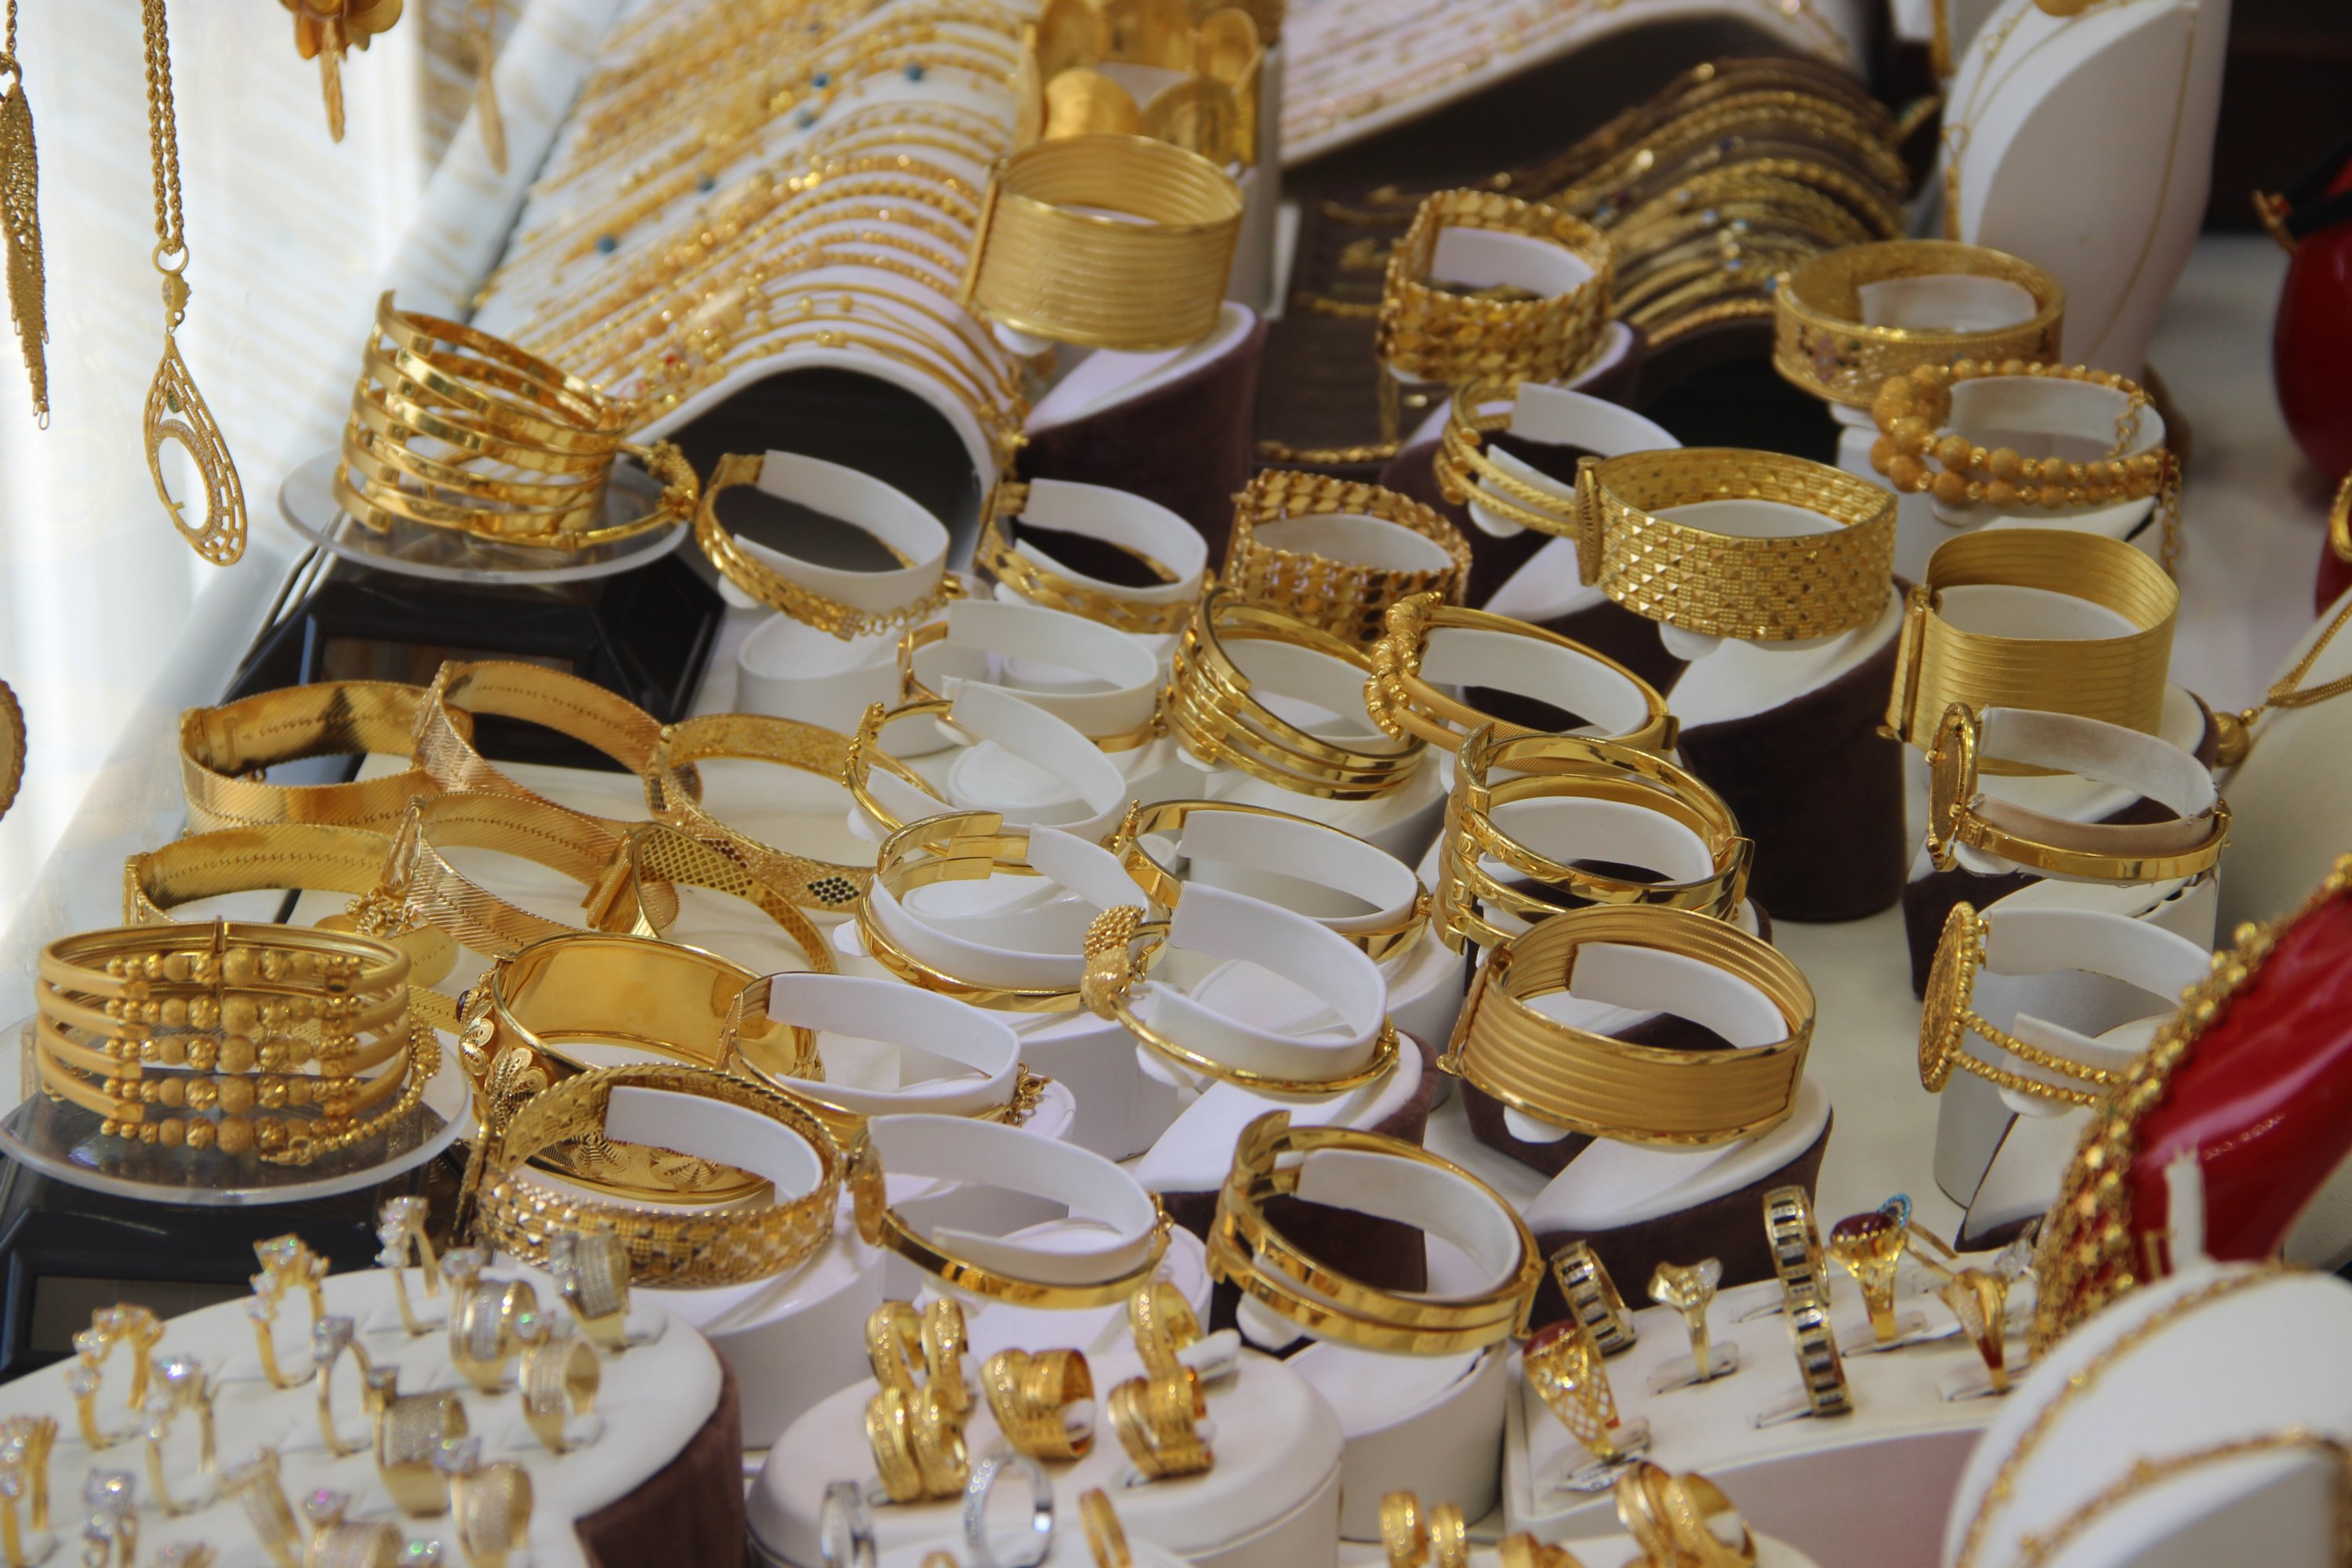 Rising gold prices put dent in lavish tribal weddings in eastern Turkey |  Daily Sabah